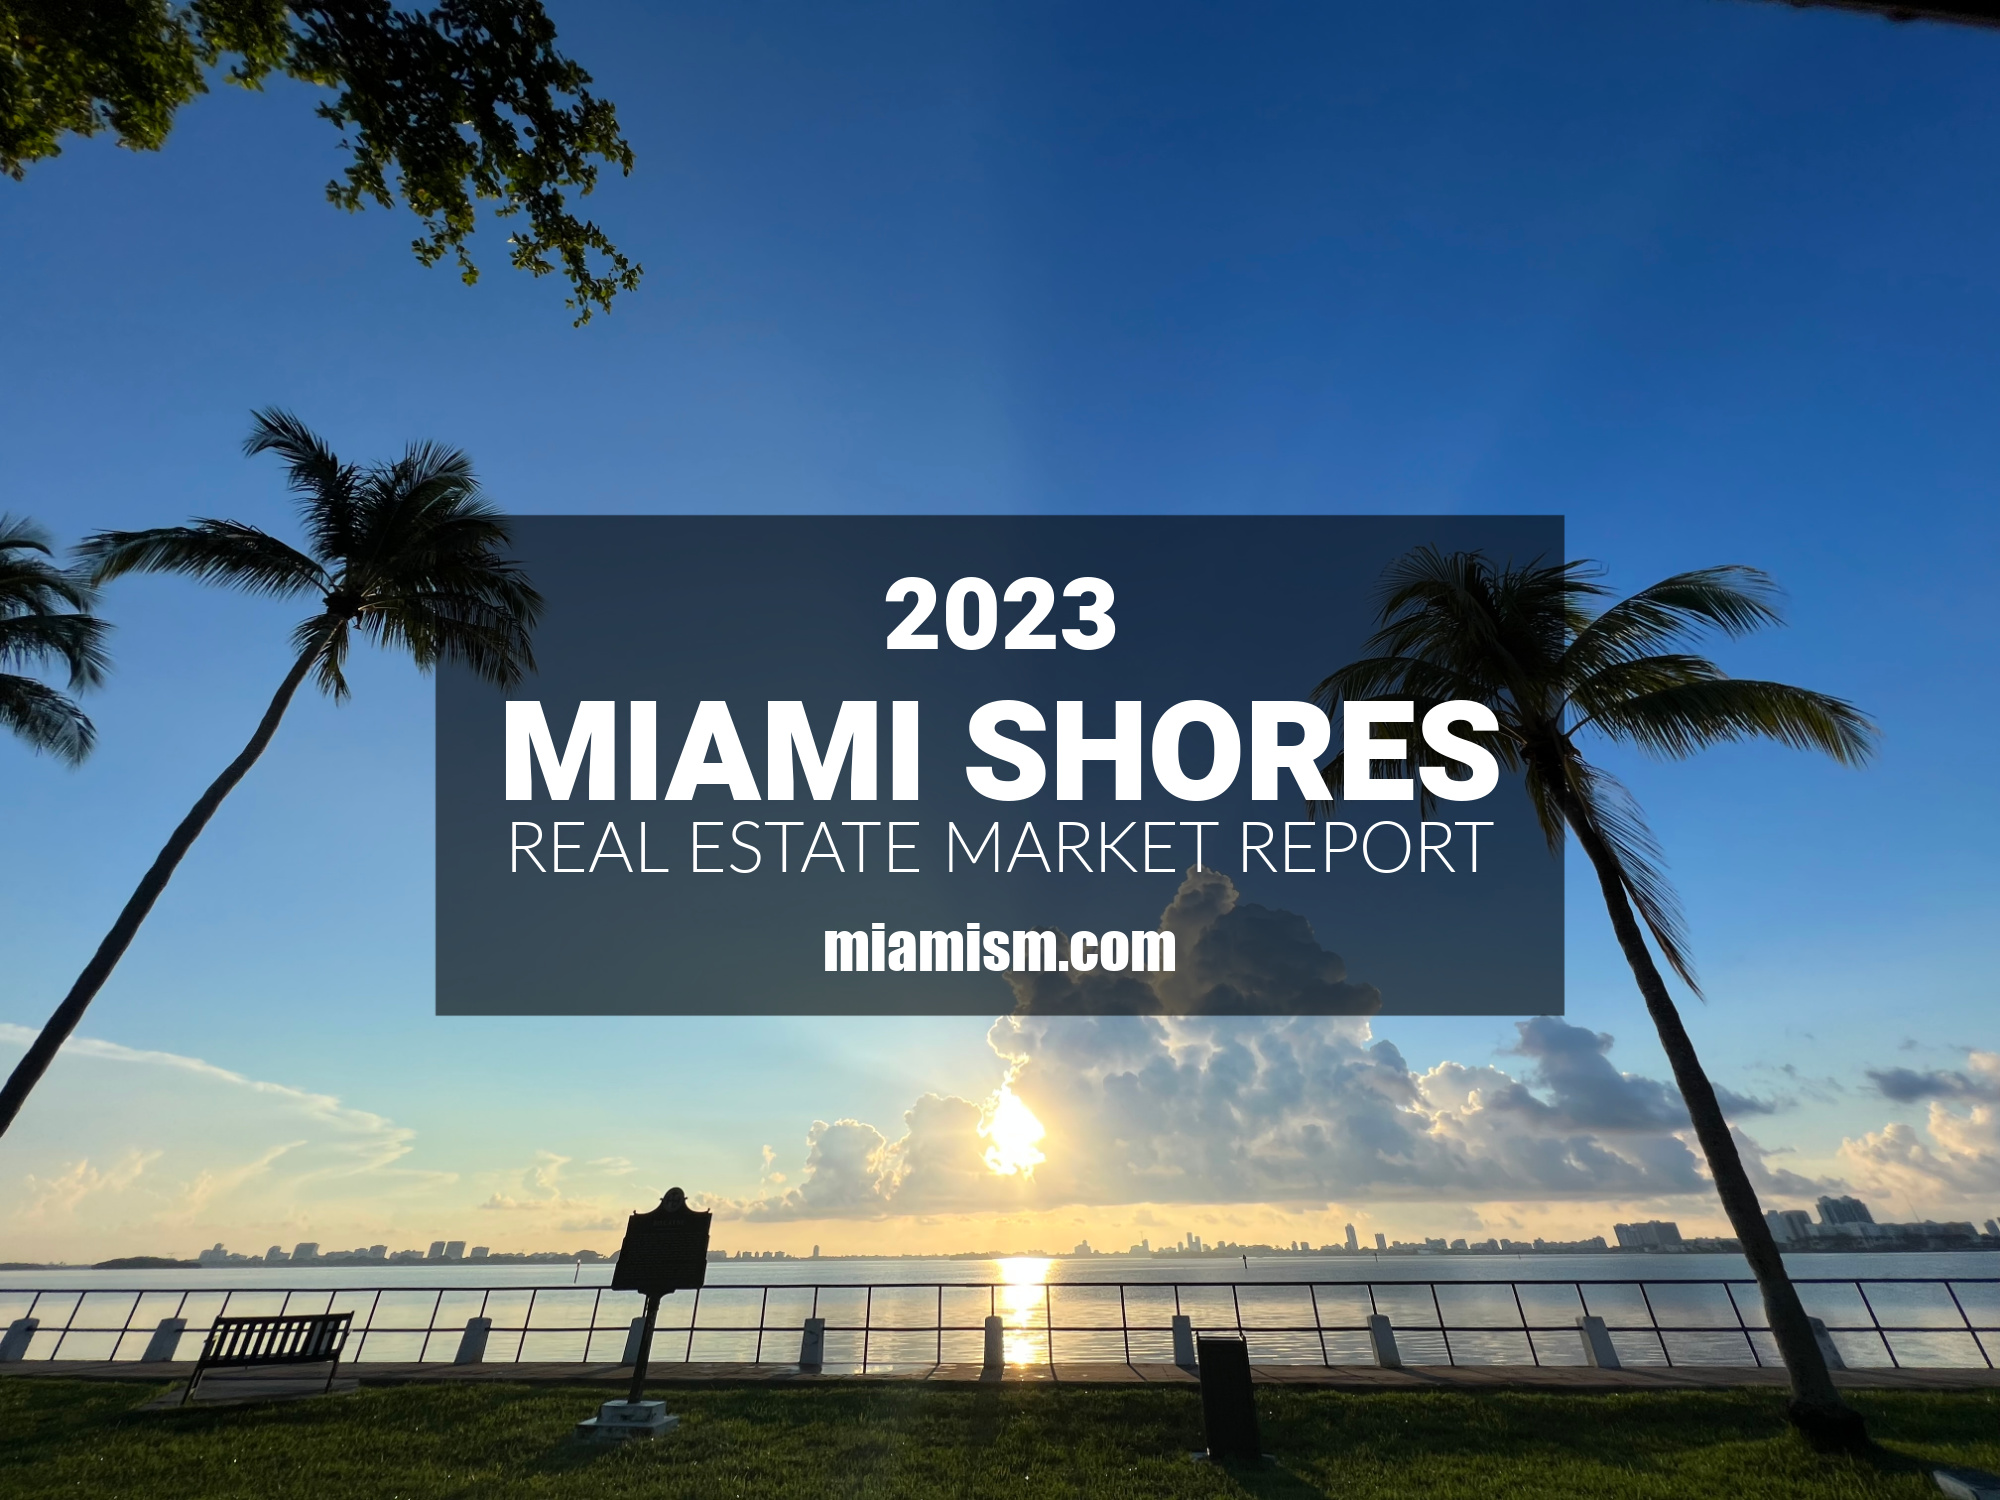 Annual Overview: Miami Shores 2023 Real Estate Market - Comprehensive Yearly Analysis and Trends